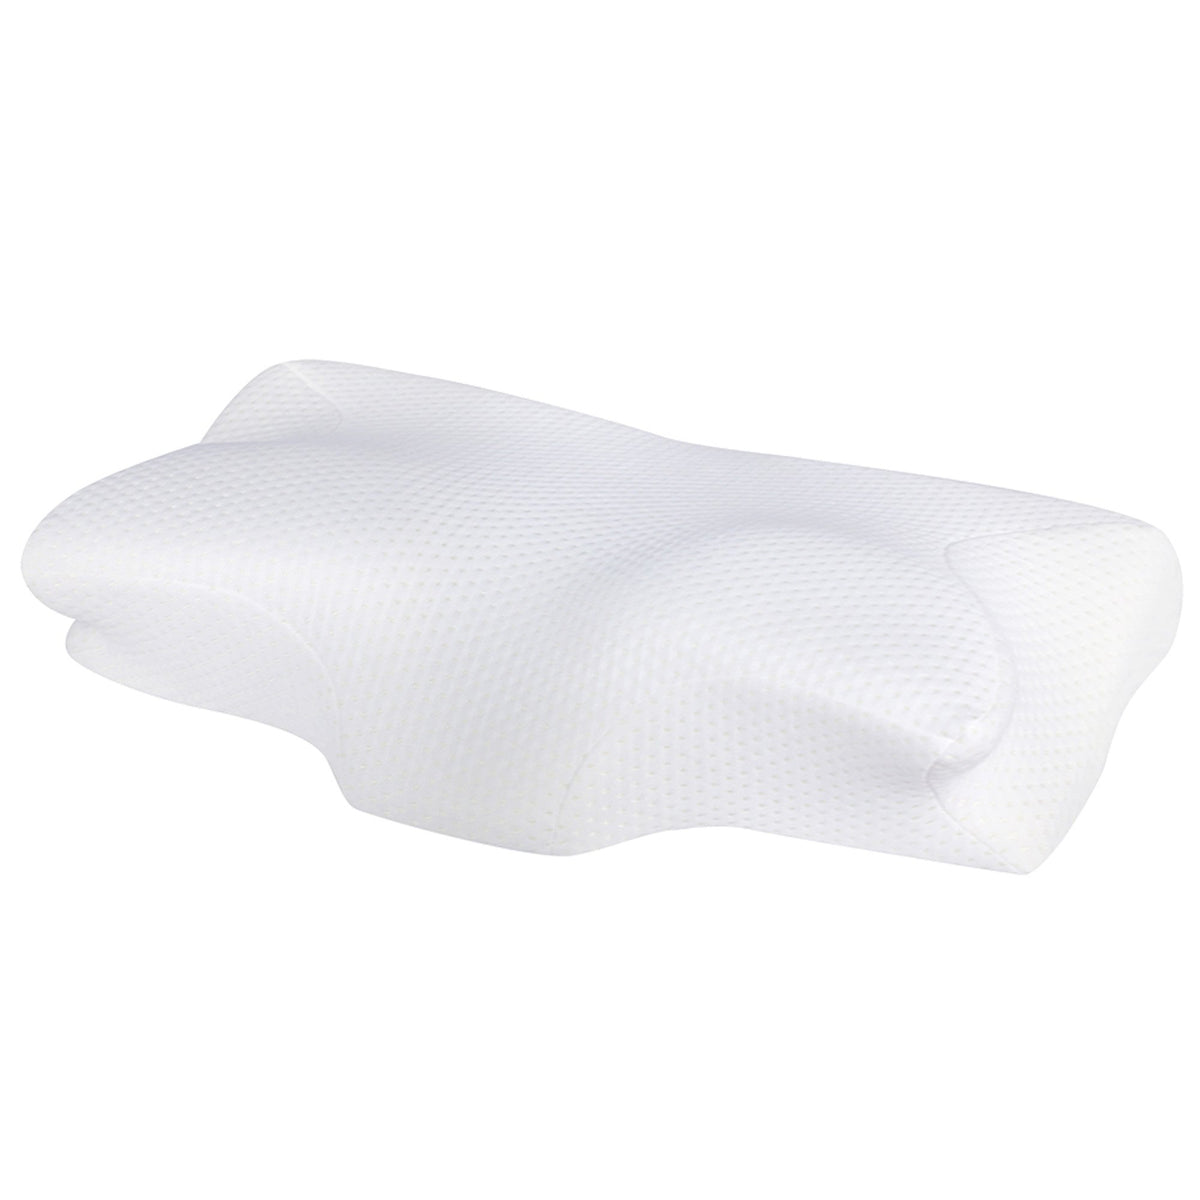 Mars Wellness Side Sleeping Pillow for Side Sleepers and CPAP Users - Extra Pillowcase - Memory Foam Pillow for Side, Back and Stomach Sleep - Mars Med Supply